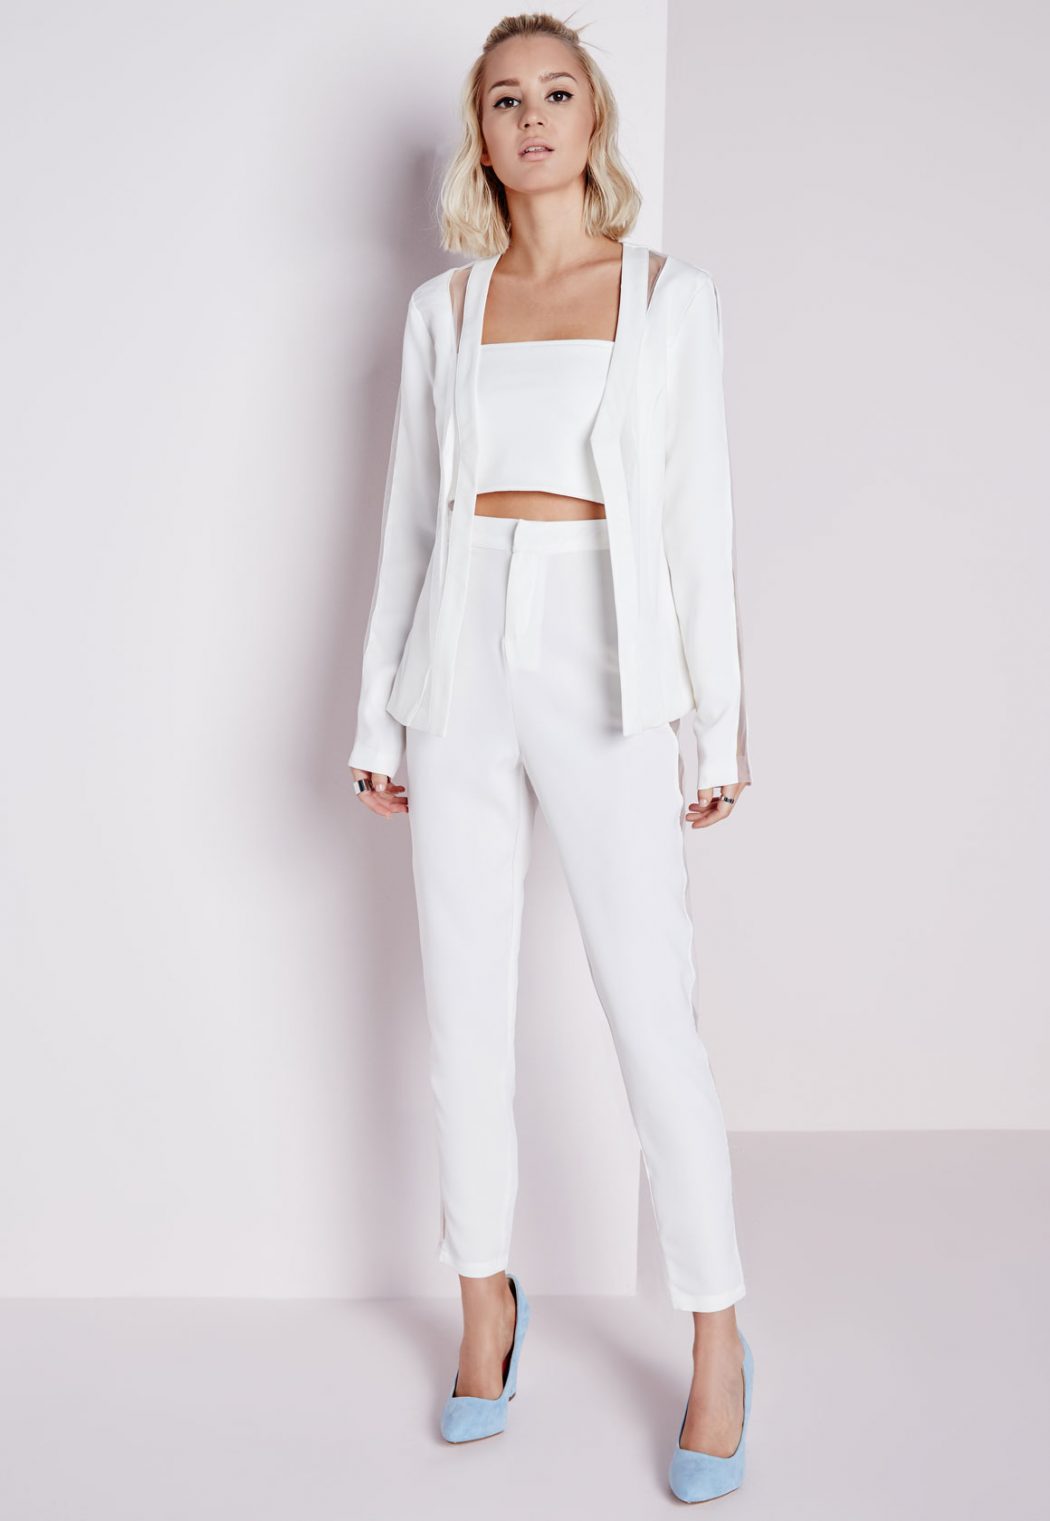 White-Trousers1 20+ Hottest White Party Outfits Ideas for Women in 2020